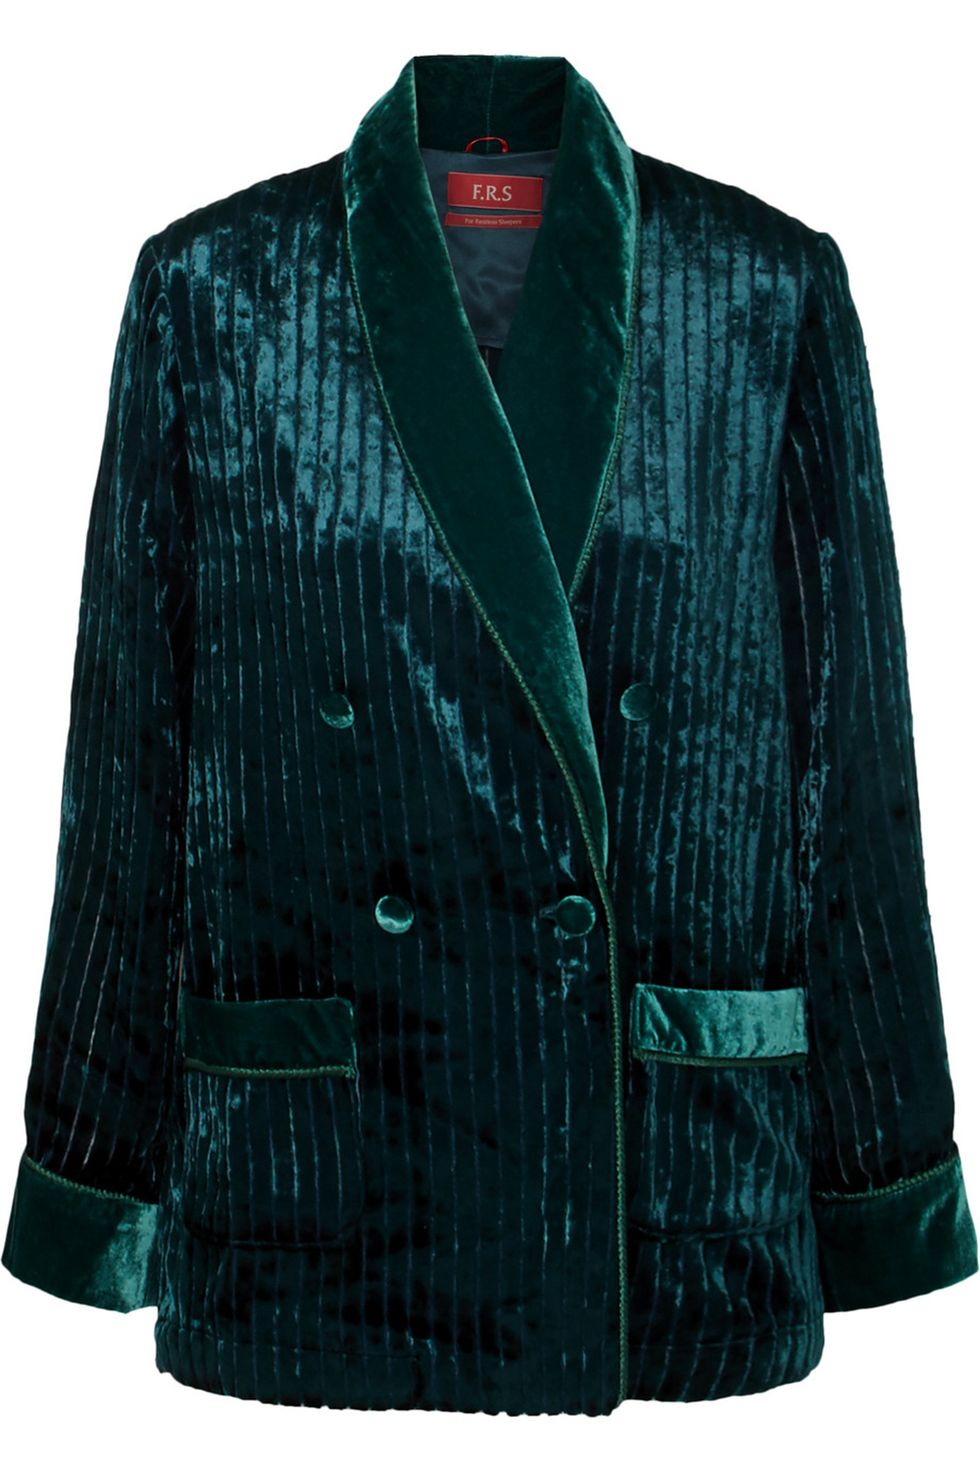 Clothing, Outerwear, Jacket, Green, Blazer, Turquoise, Sleeve, Button, Pattern, Top, 